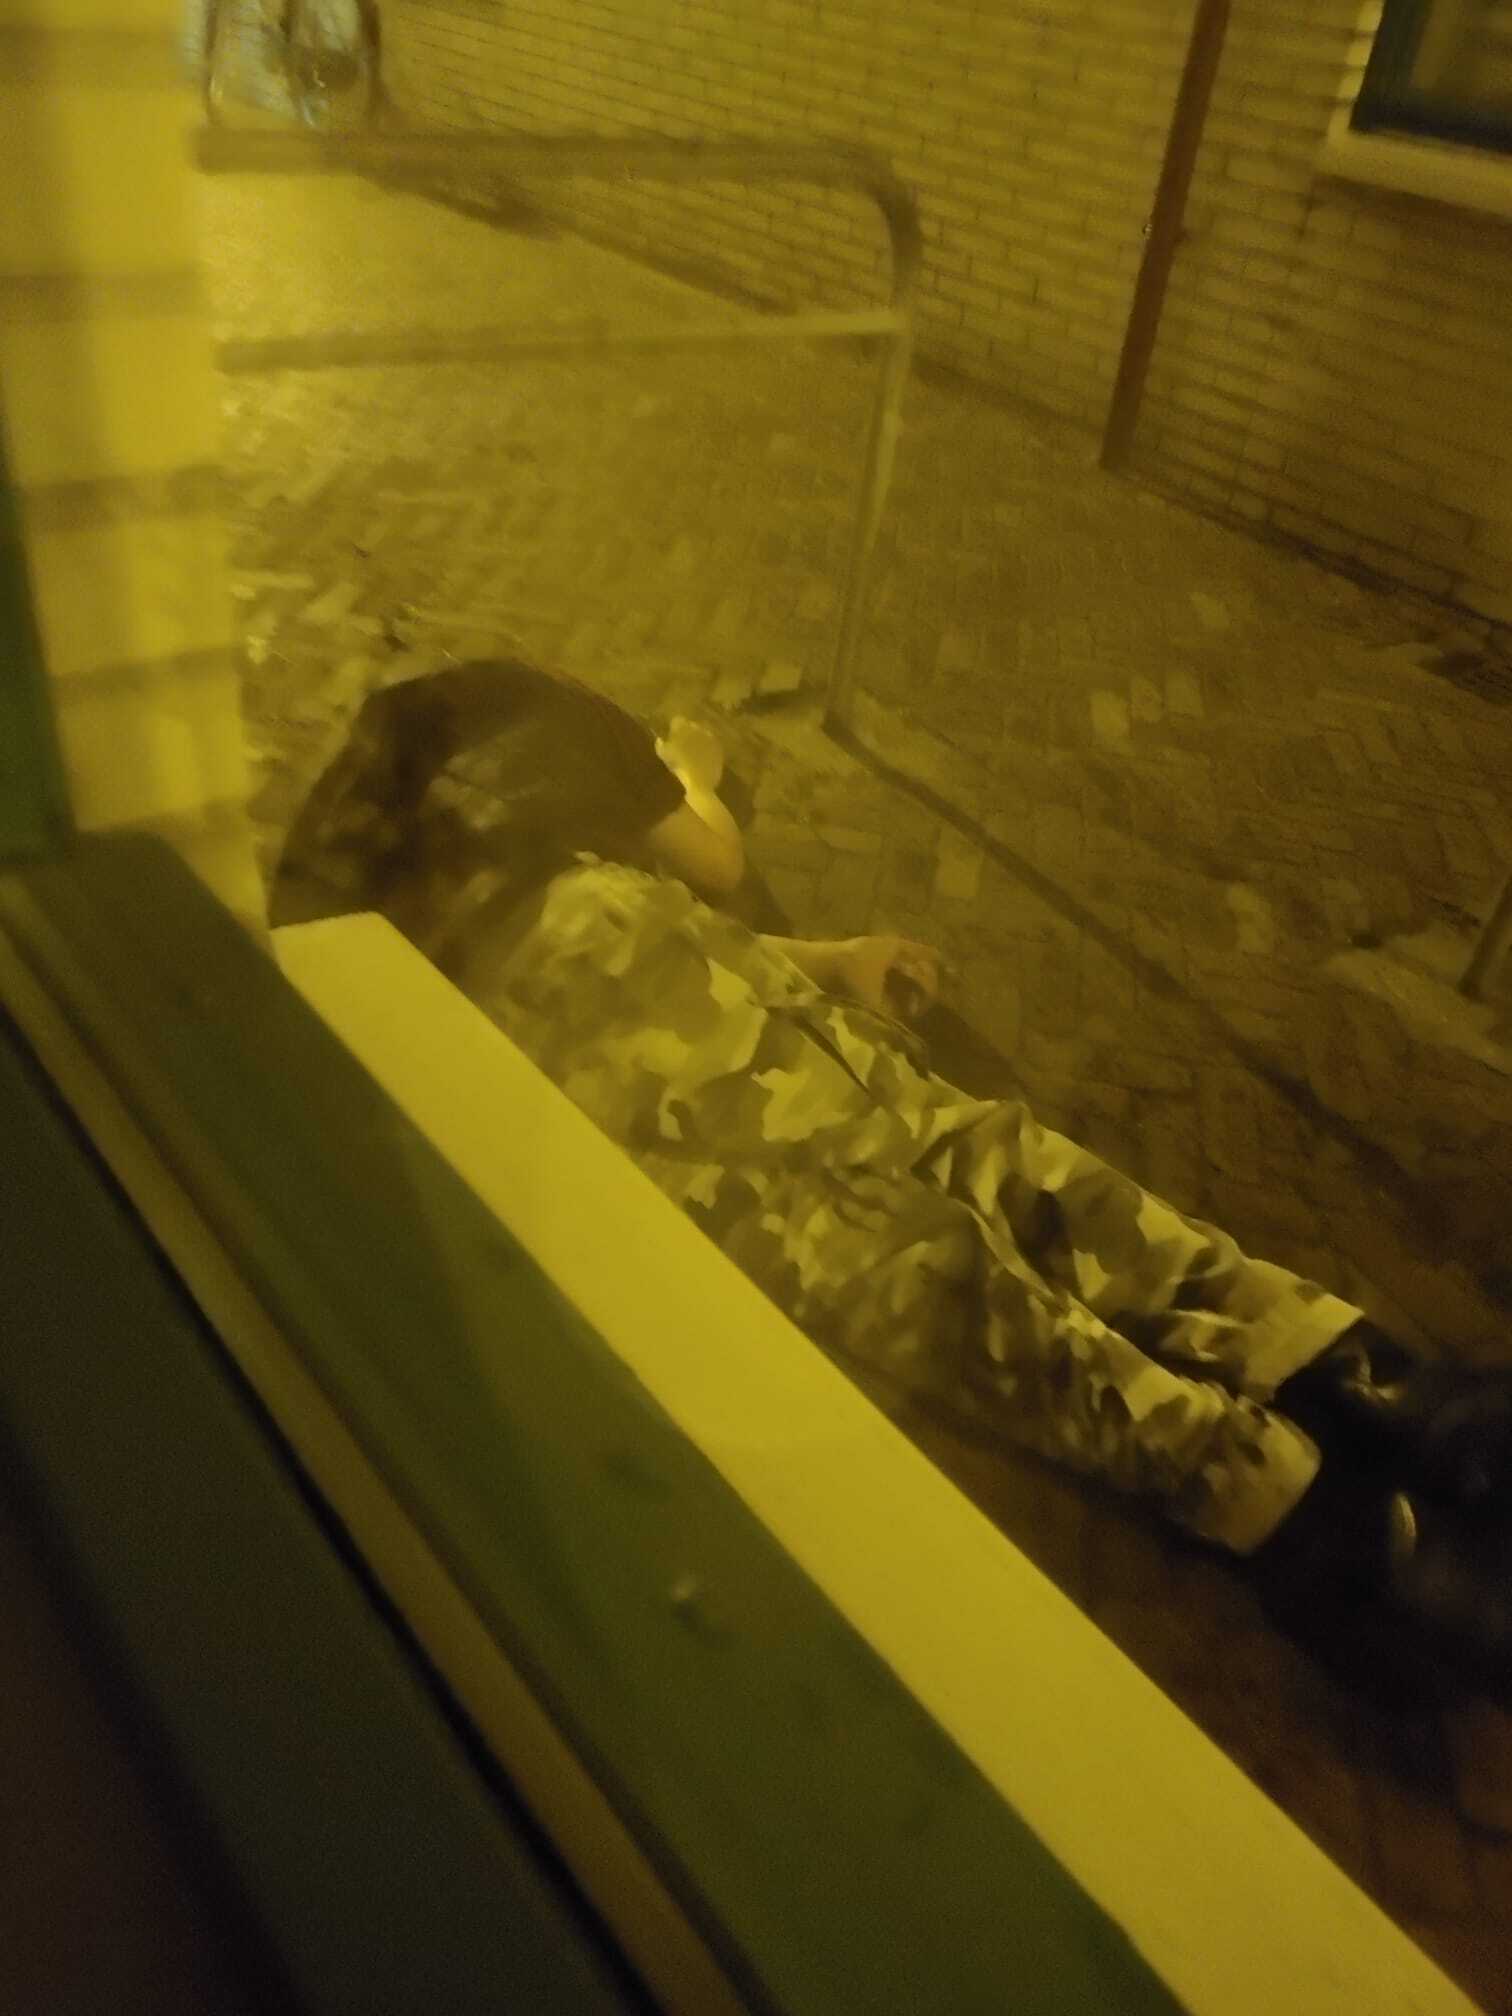 Guy on drugs fell and started yelling right outside my window